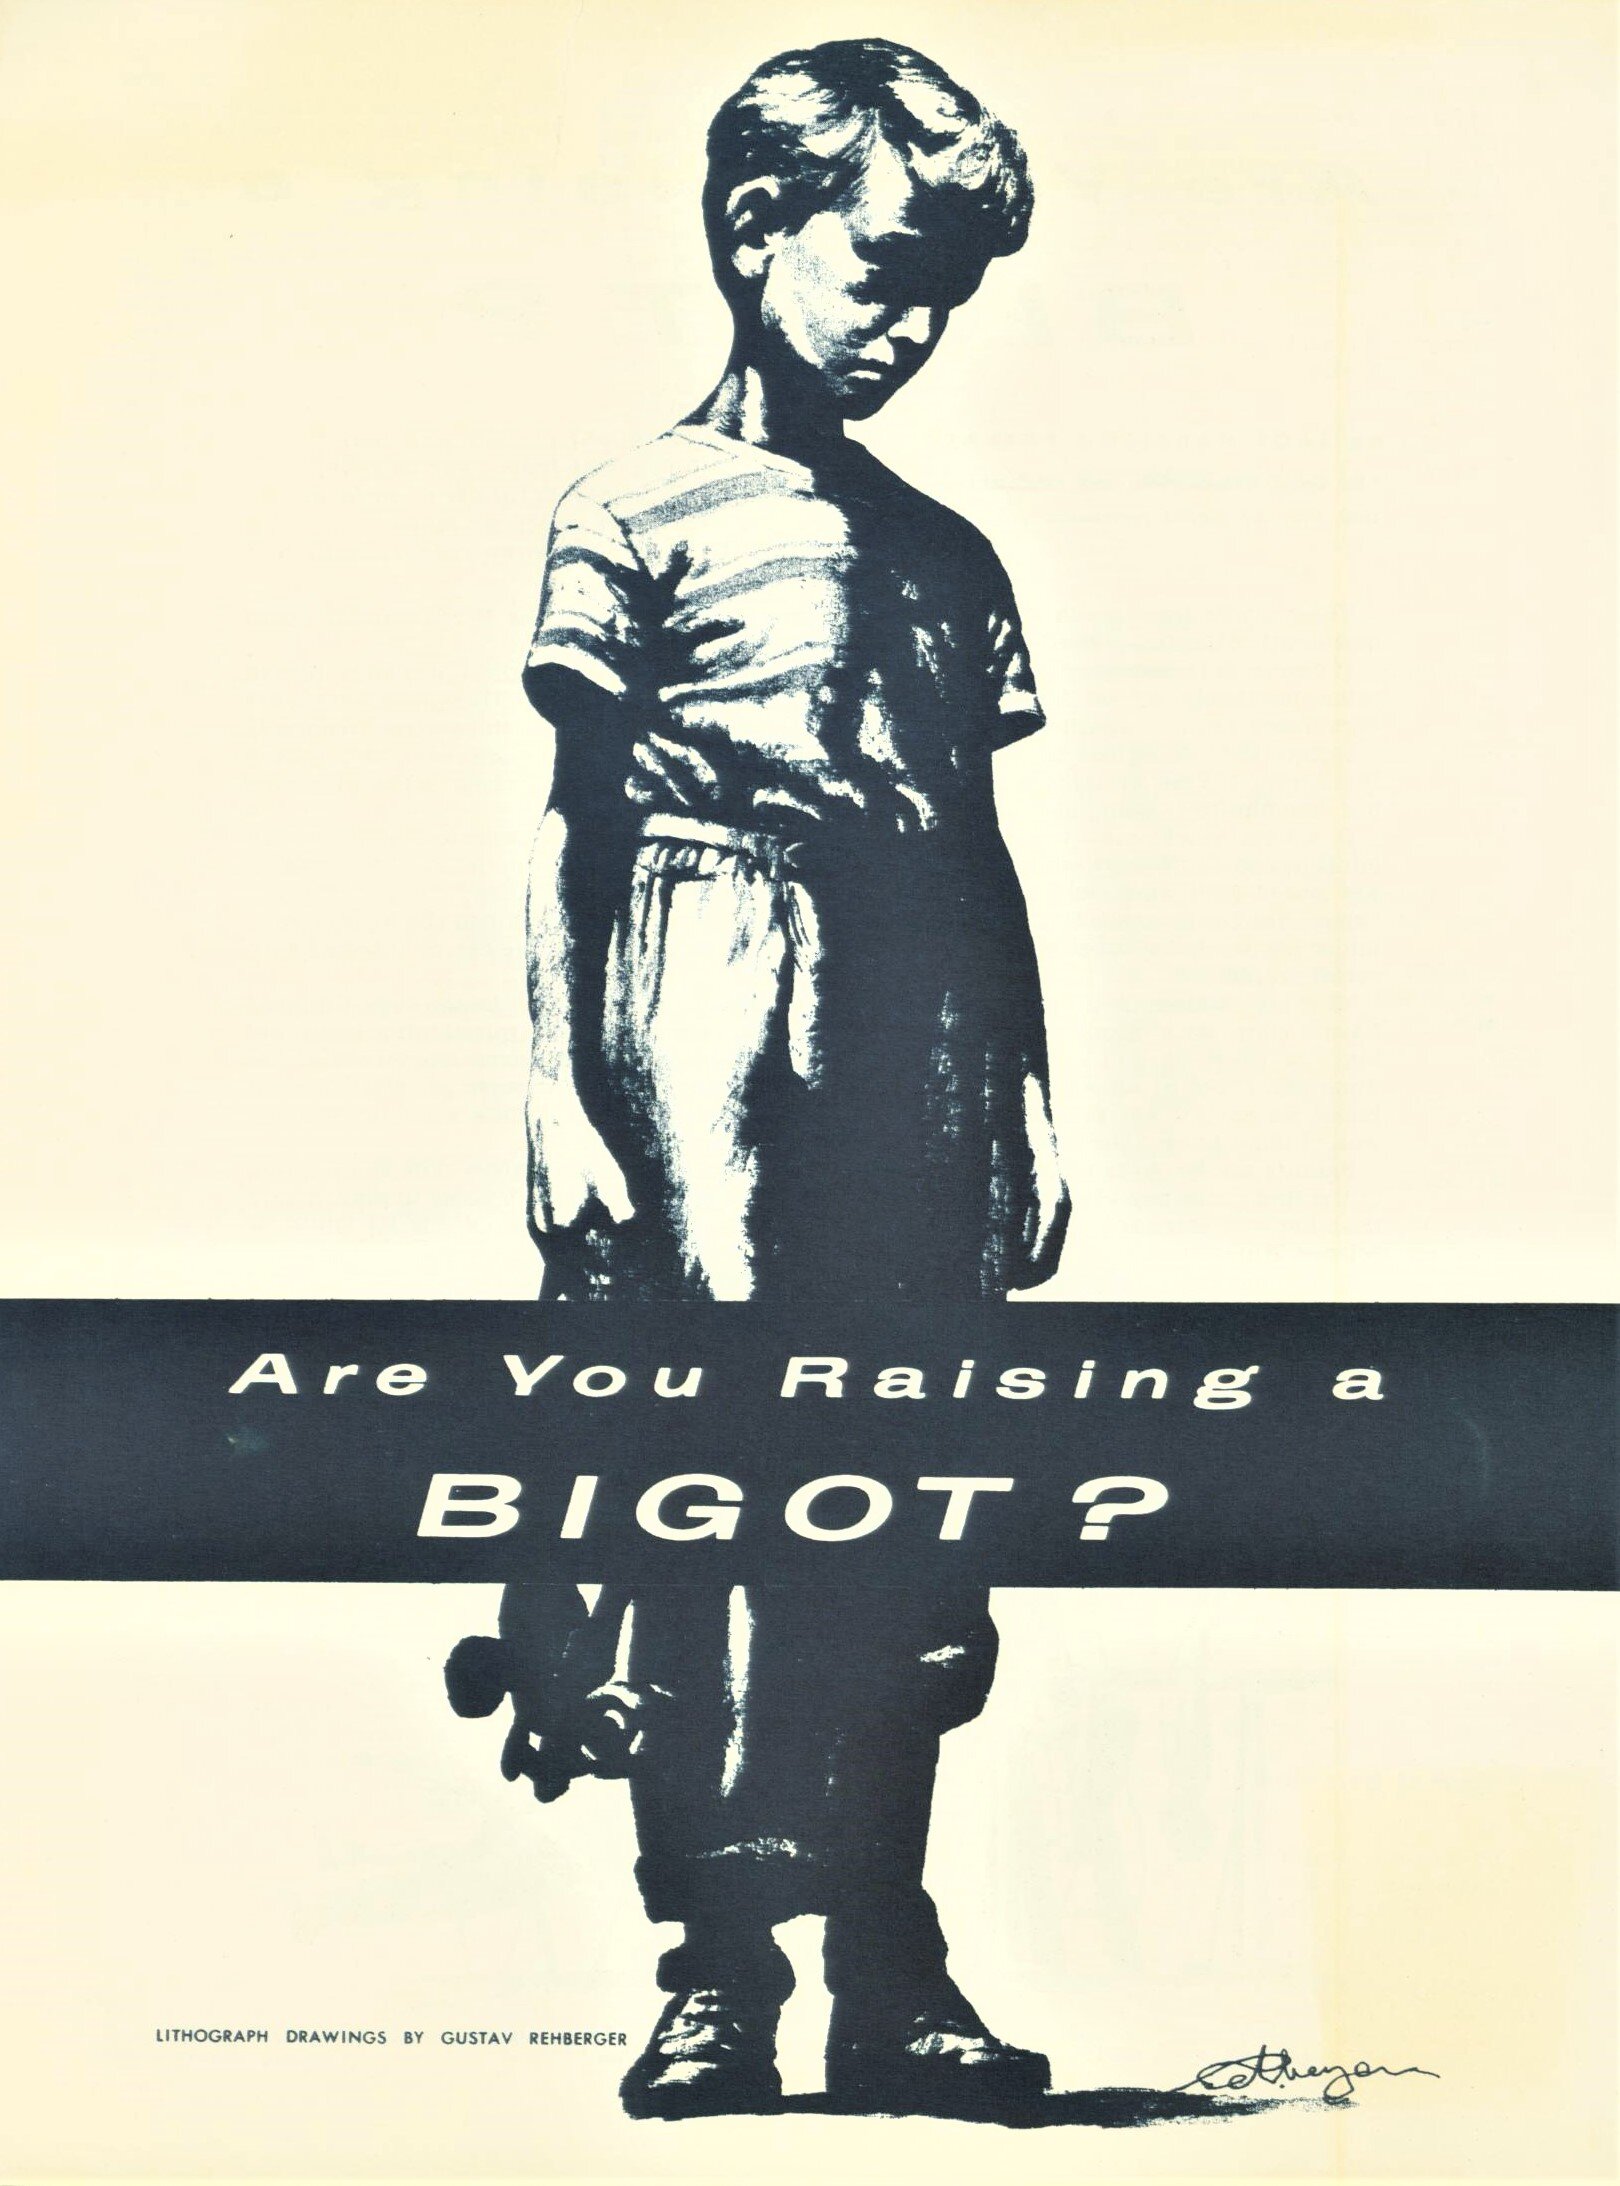 Are You Raising a Bigot Oct 1953 Everywoman's Magazine (1953 4 page pamphlet, Community Relations Service in NYC).jpg